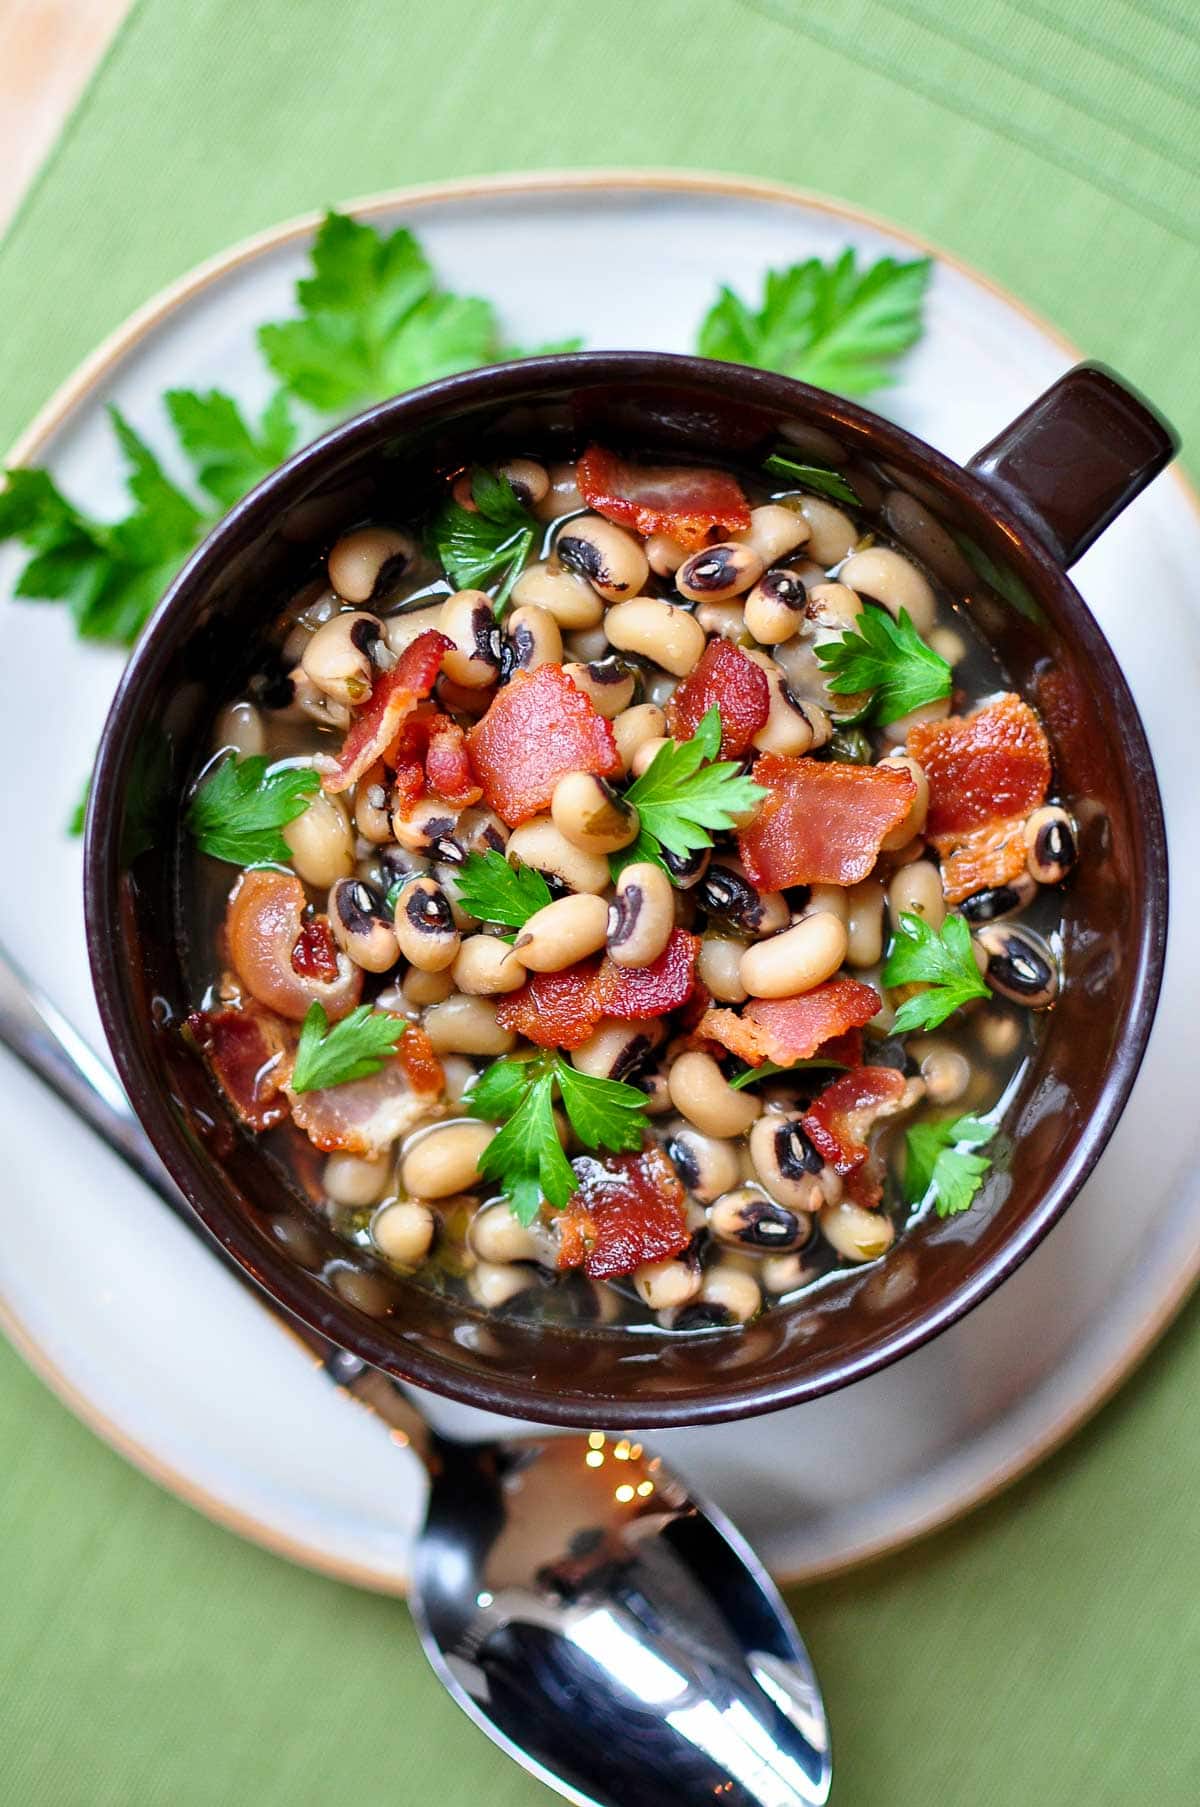 Black Eyed Peas New Years recipe with bacon and parsley.